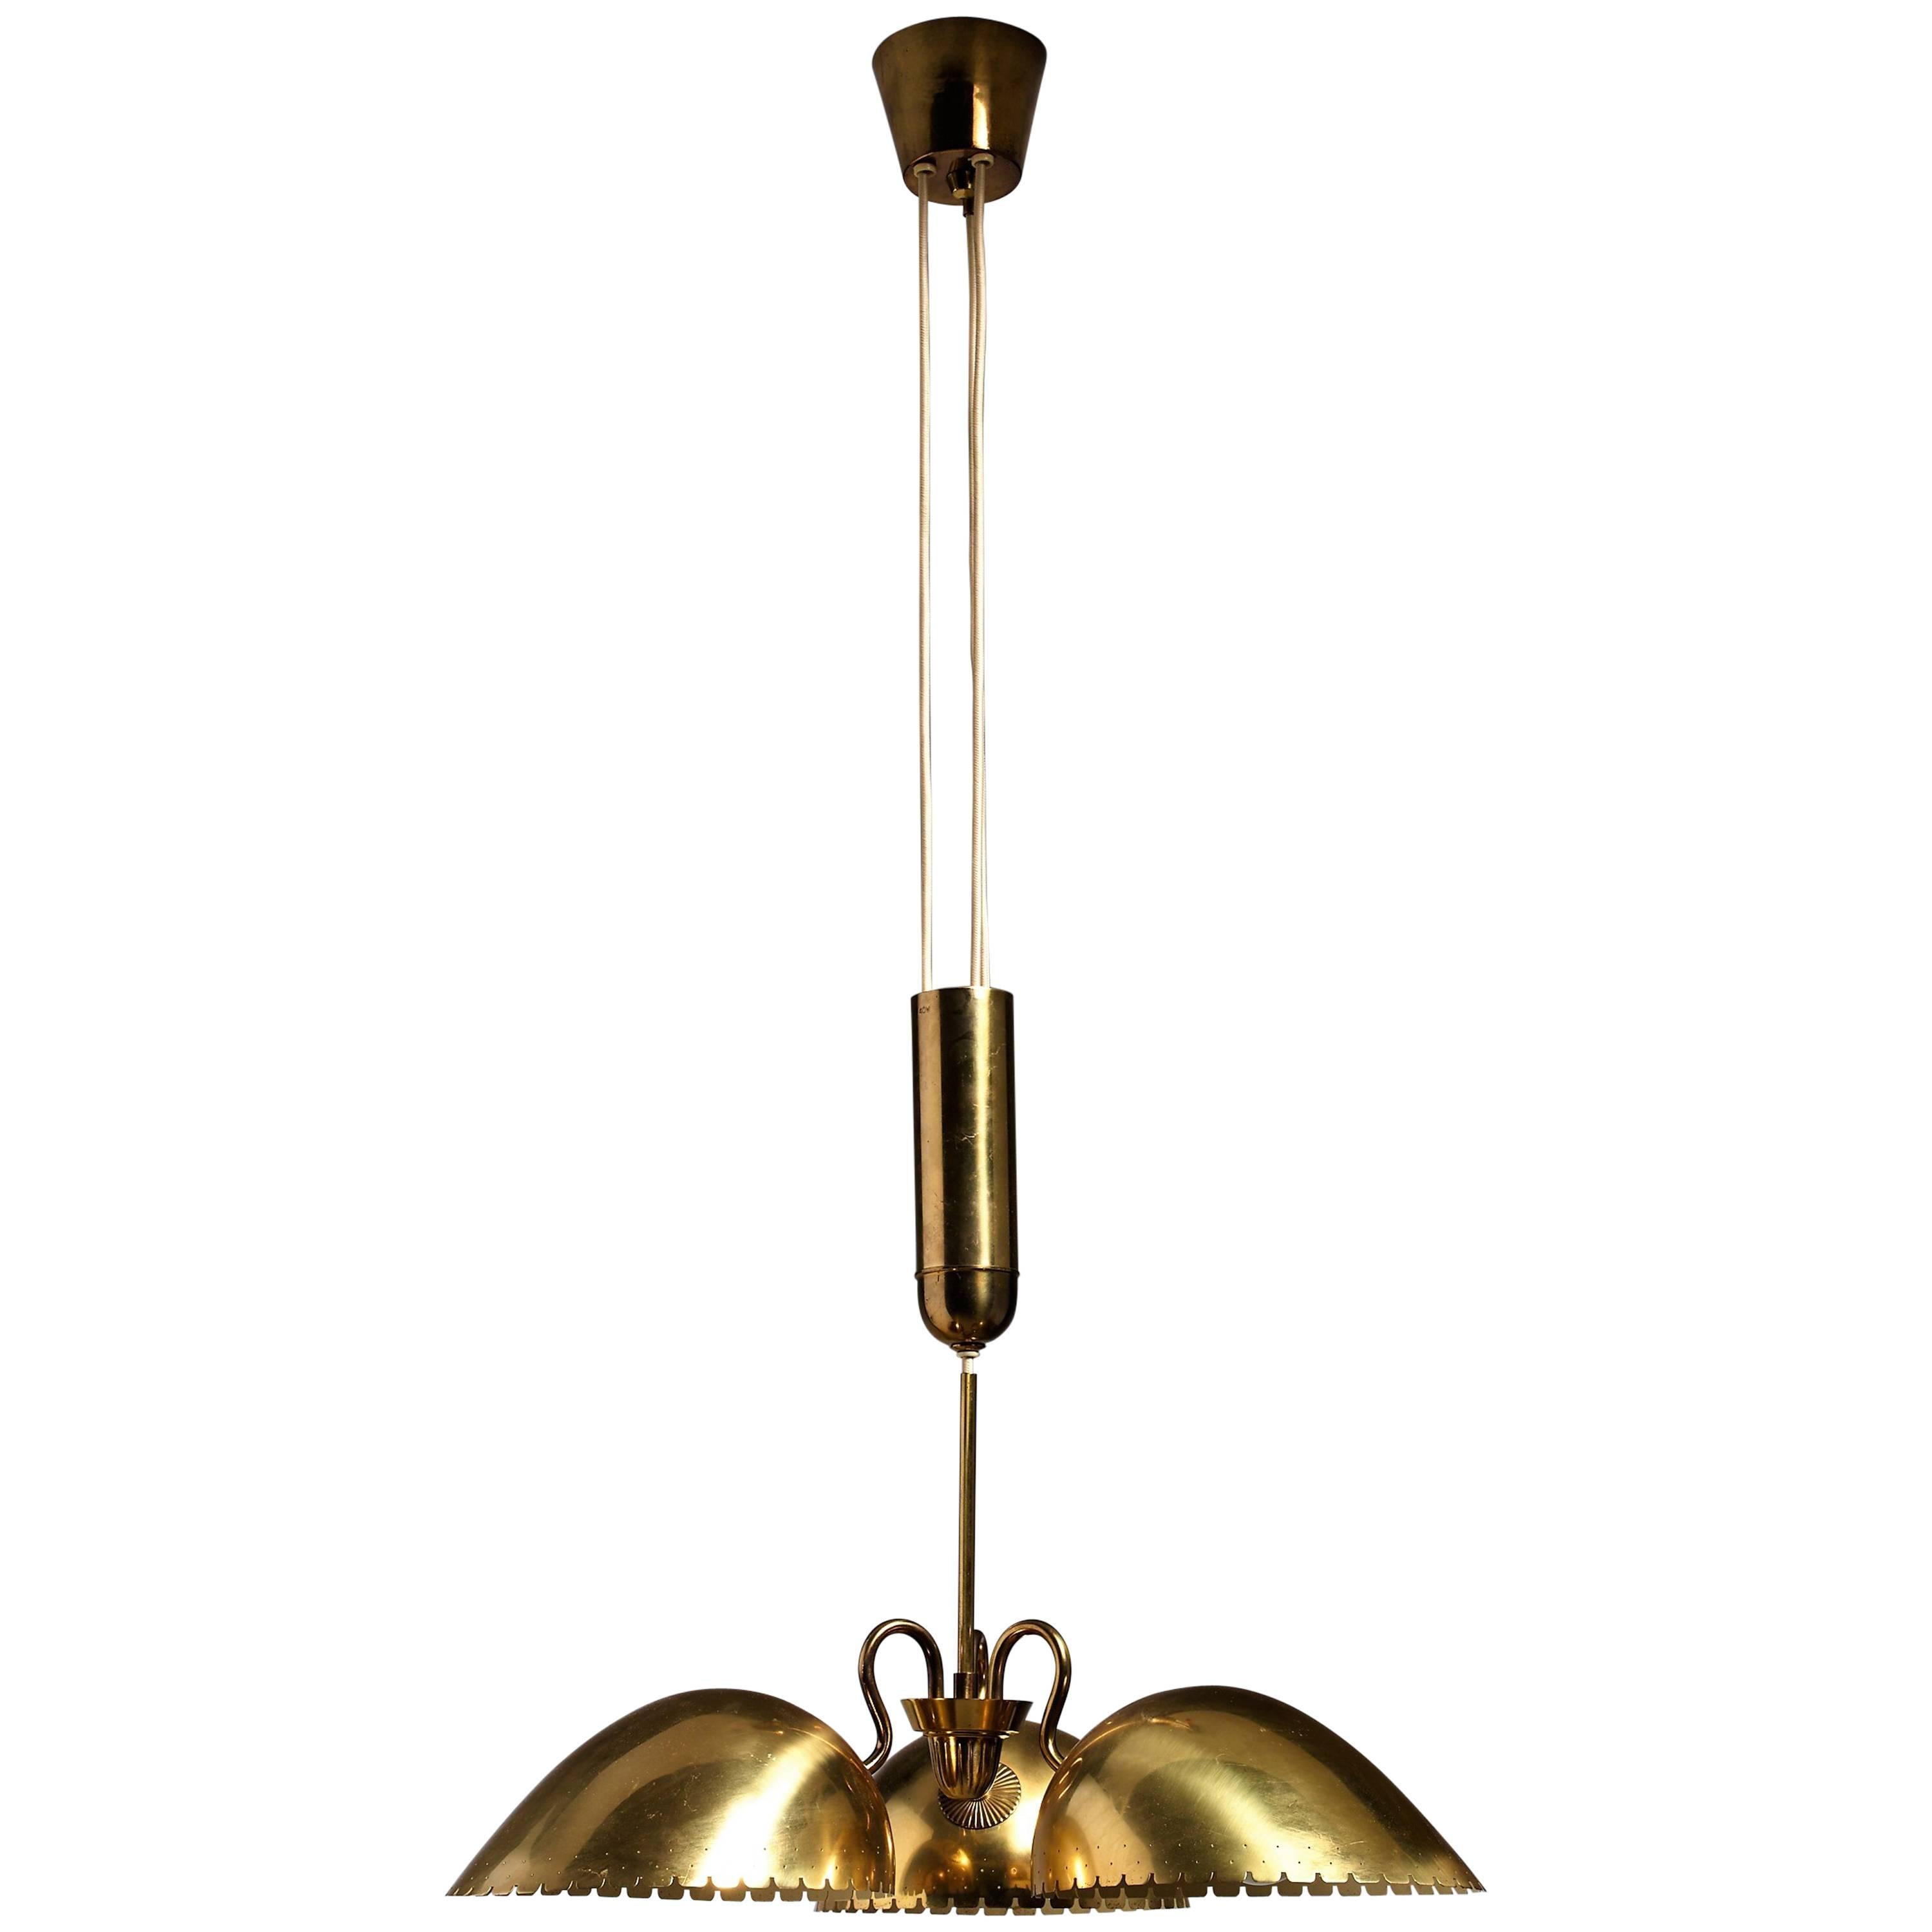 Bertil Brisborg Brass Pendant with Three Shades and Counterweight, Sweden, 1940 For Sale